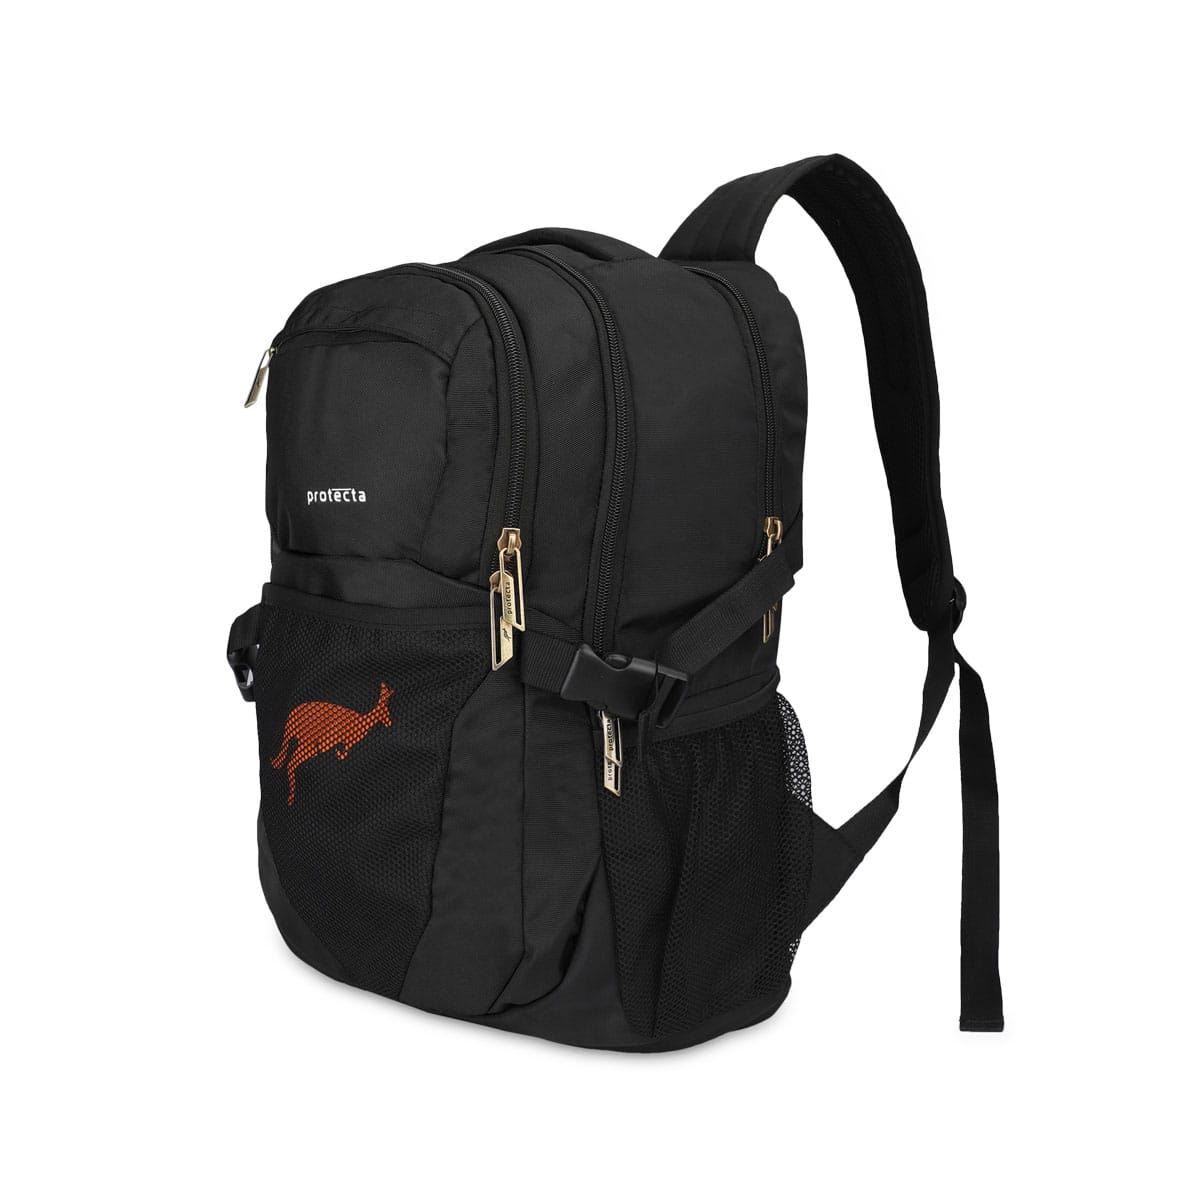 Black | Protecta Enigma Laptop Backpack-1